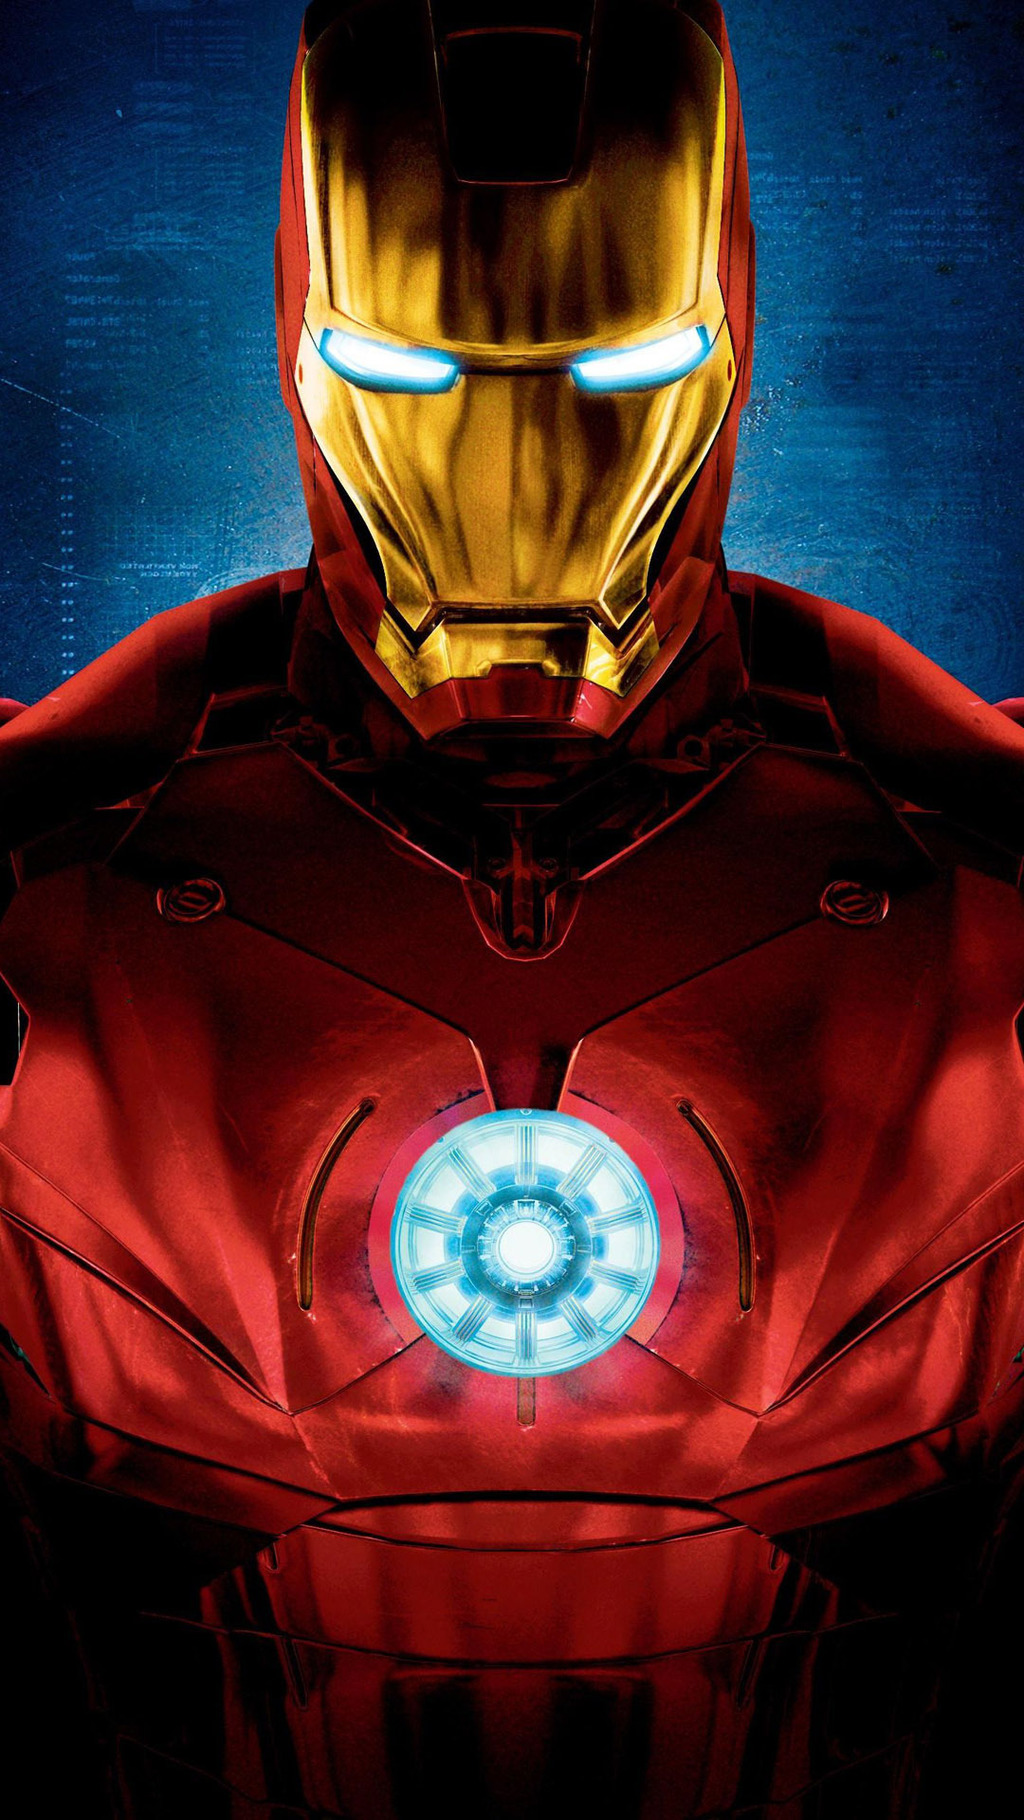 Iron man suit - Best HTC One M9 wallpapers free download | Lawyer ...